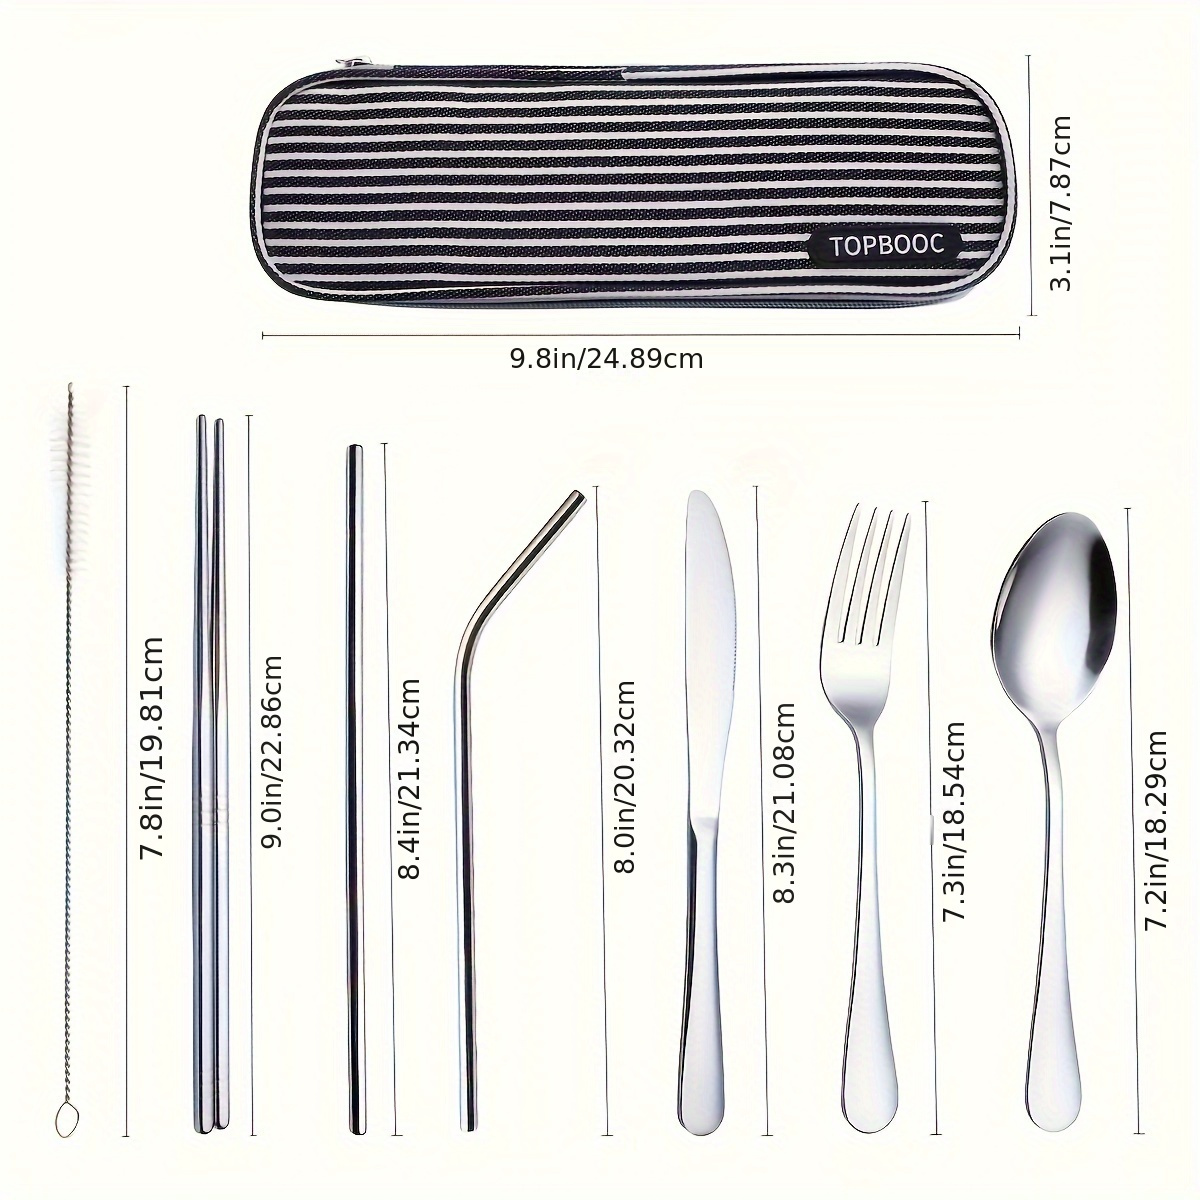 Topbooc portable stainless steel flatware set, travel camping